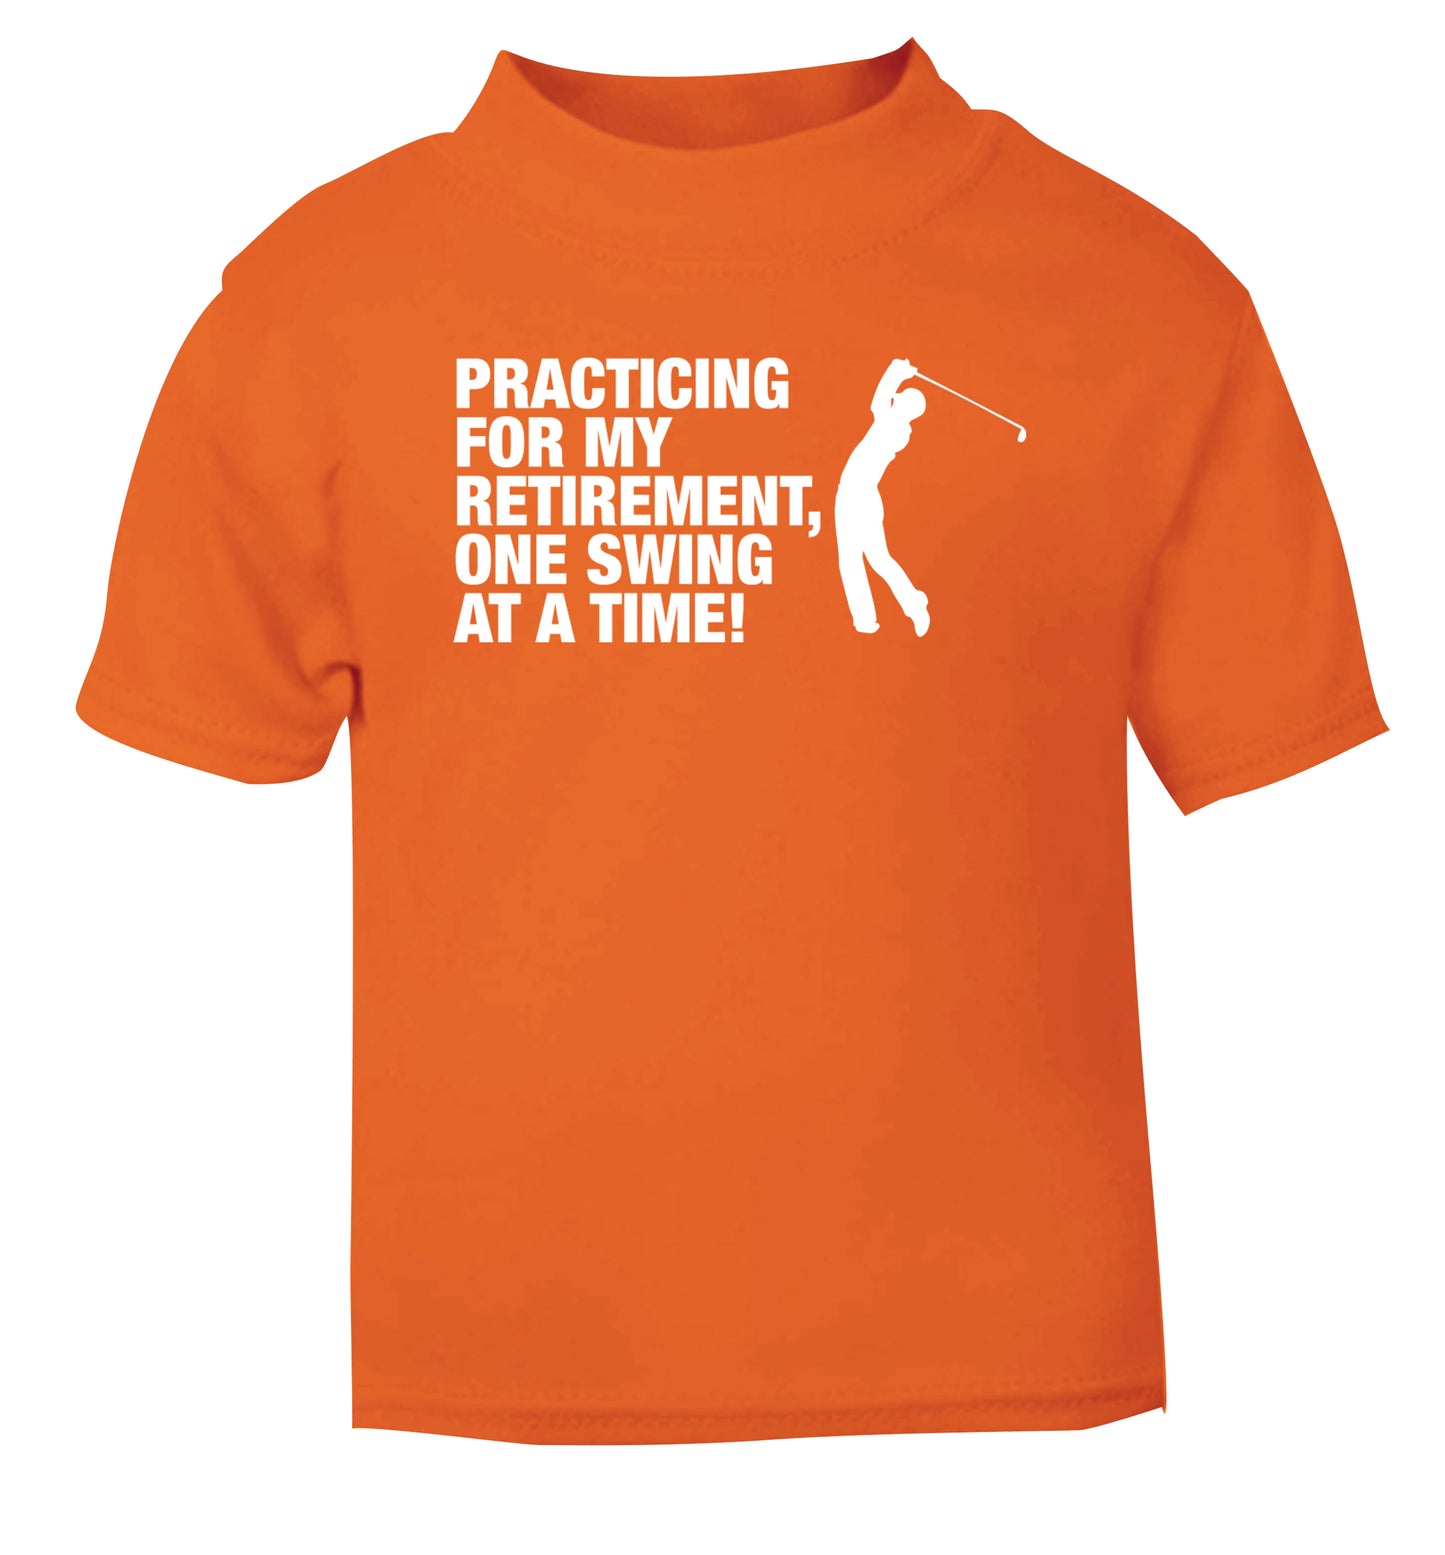 Practicing for my retirement one swing at a time orange Baby Toddler Tshirt 2 Years